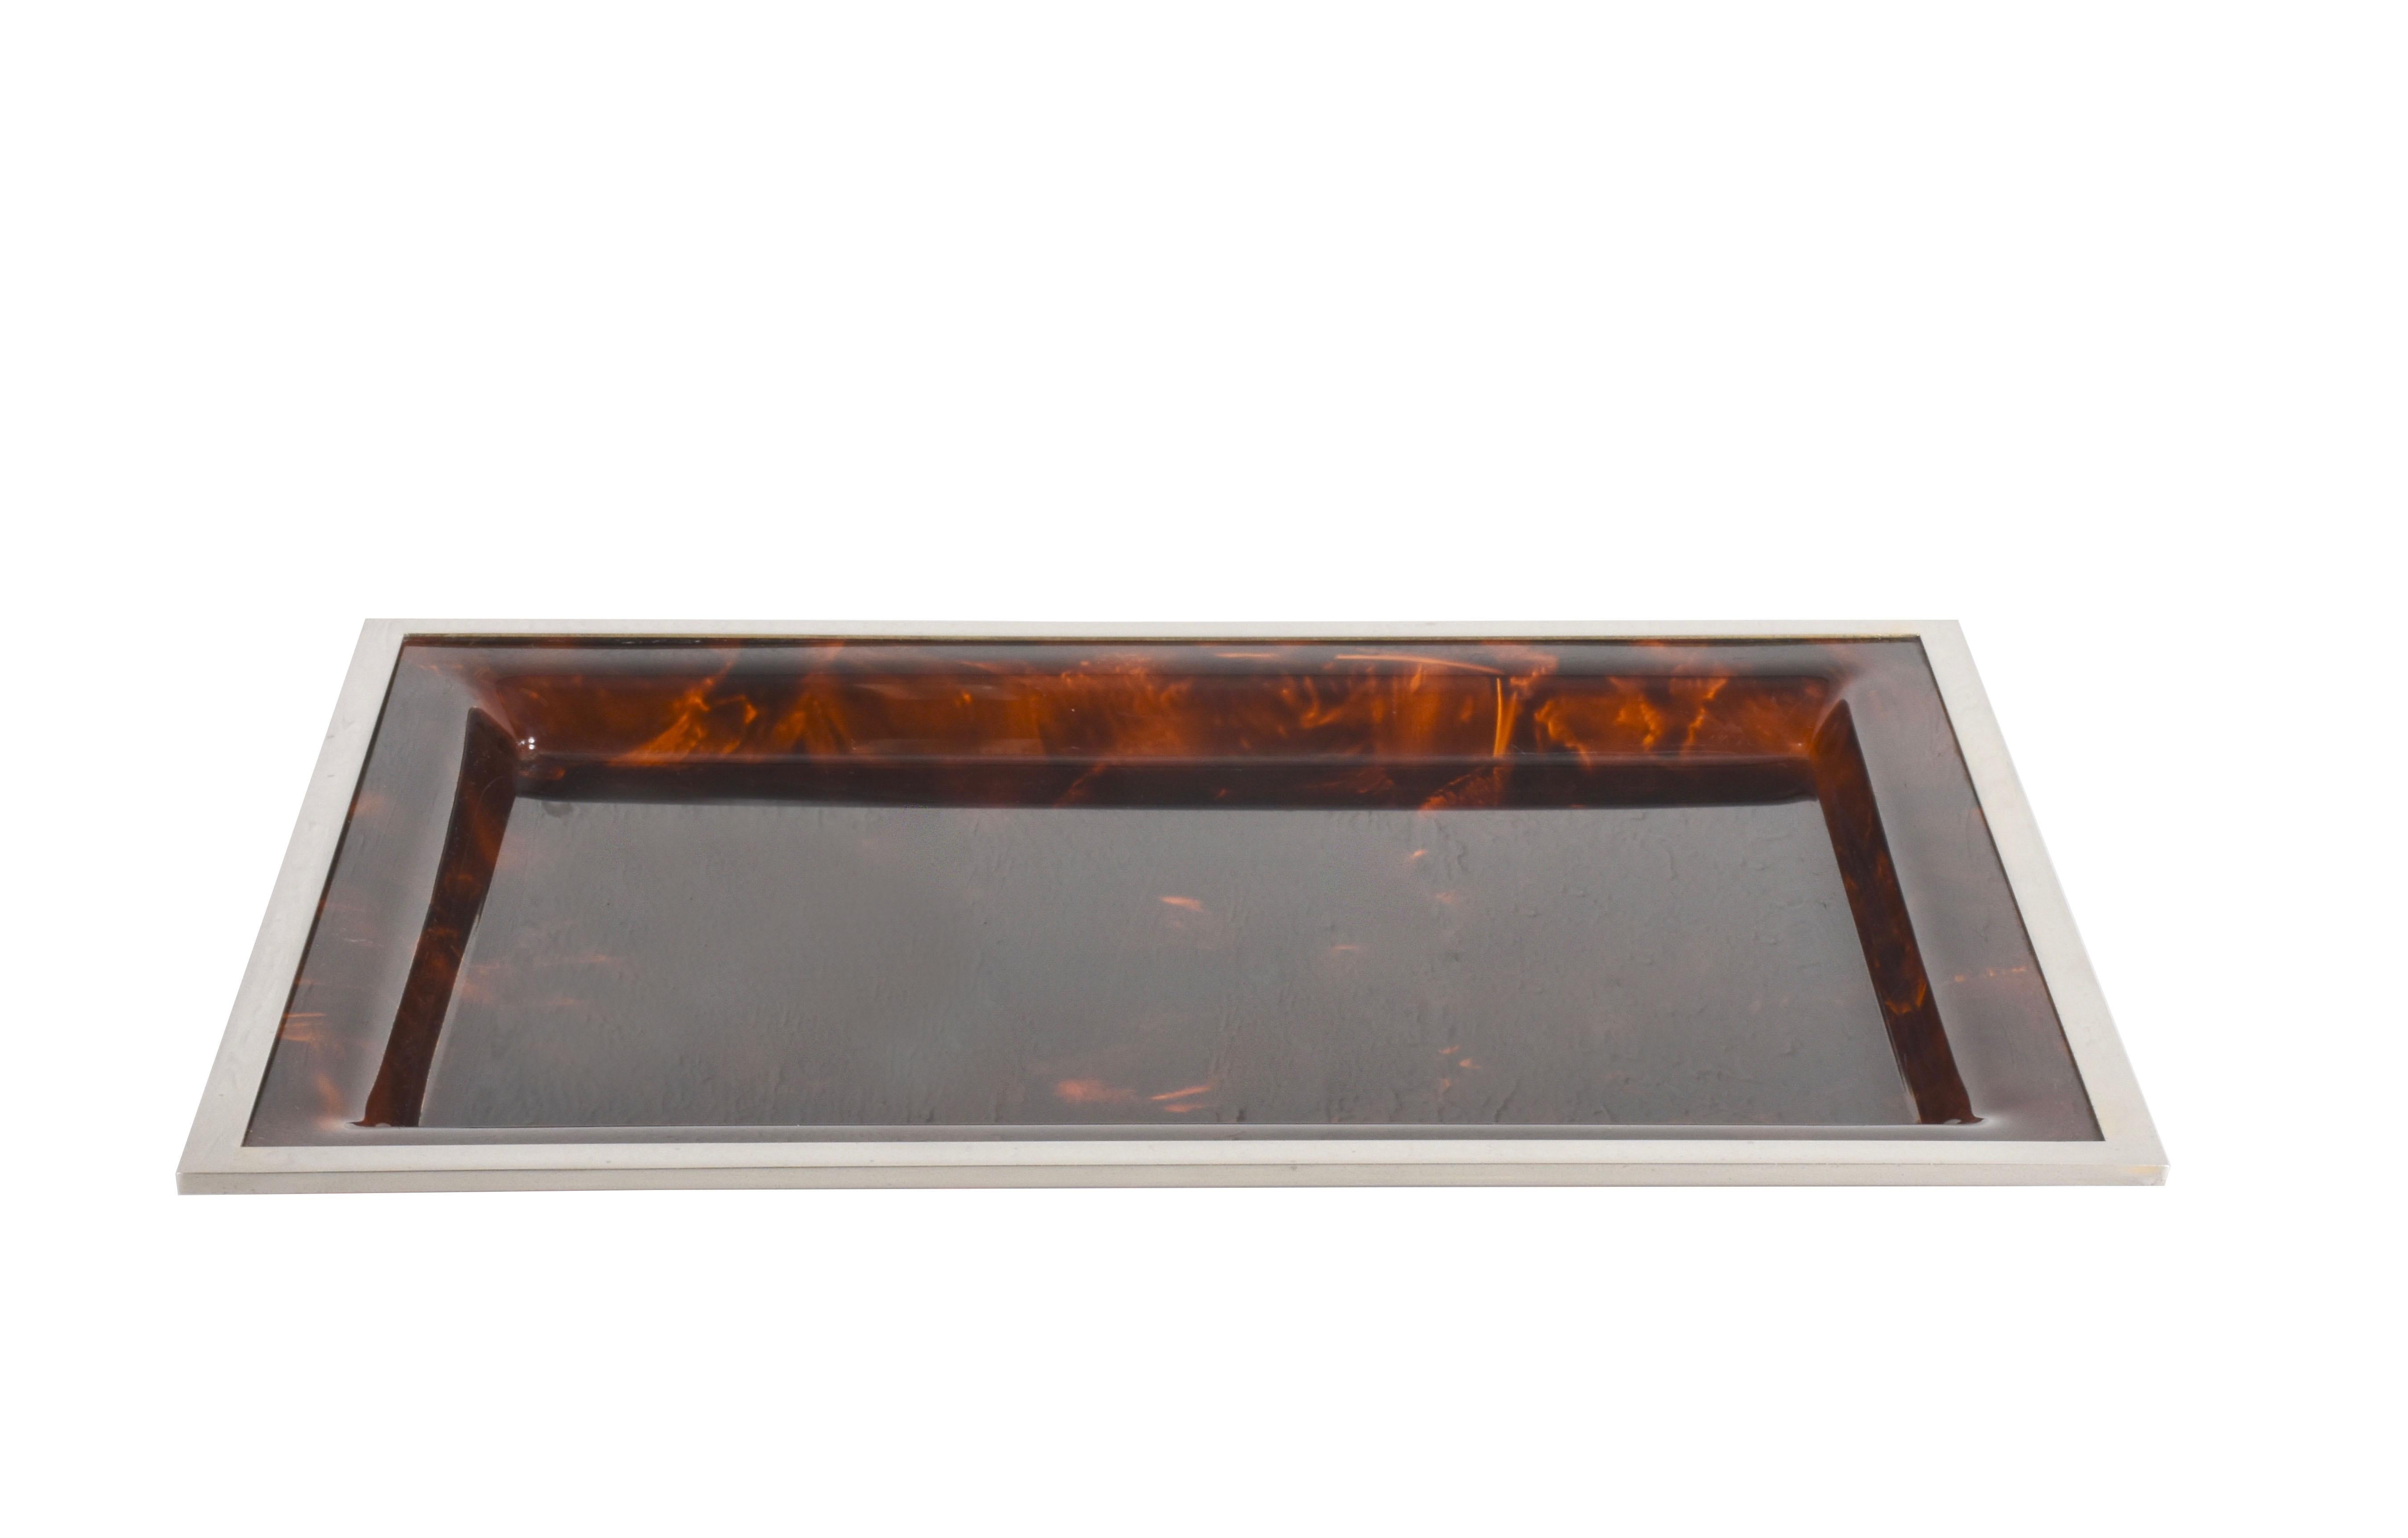 Wonderful midcentury piece of serveware, produced in Italy during the 1970s. It is a design attributed to Willy Rizzo for a Christian Dior production.

It is an iconic tortoiseshell and Lucite serving tray or platter that will amaze your guests.